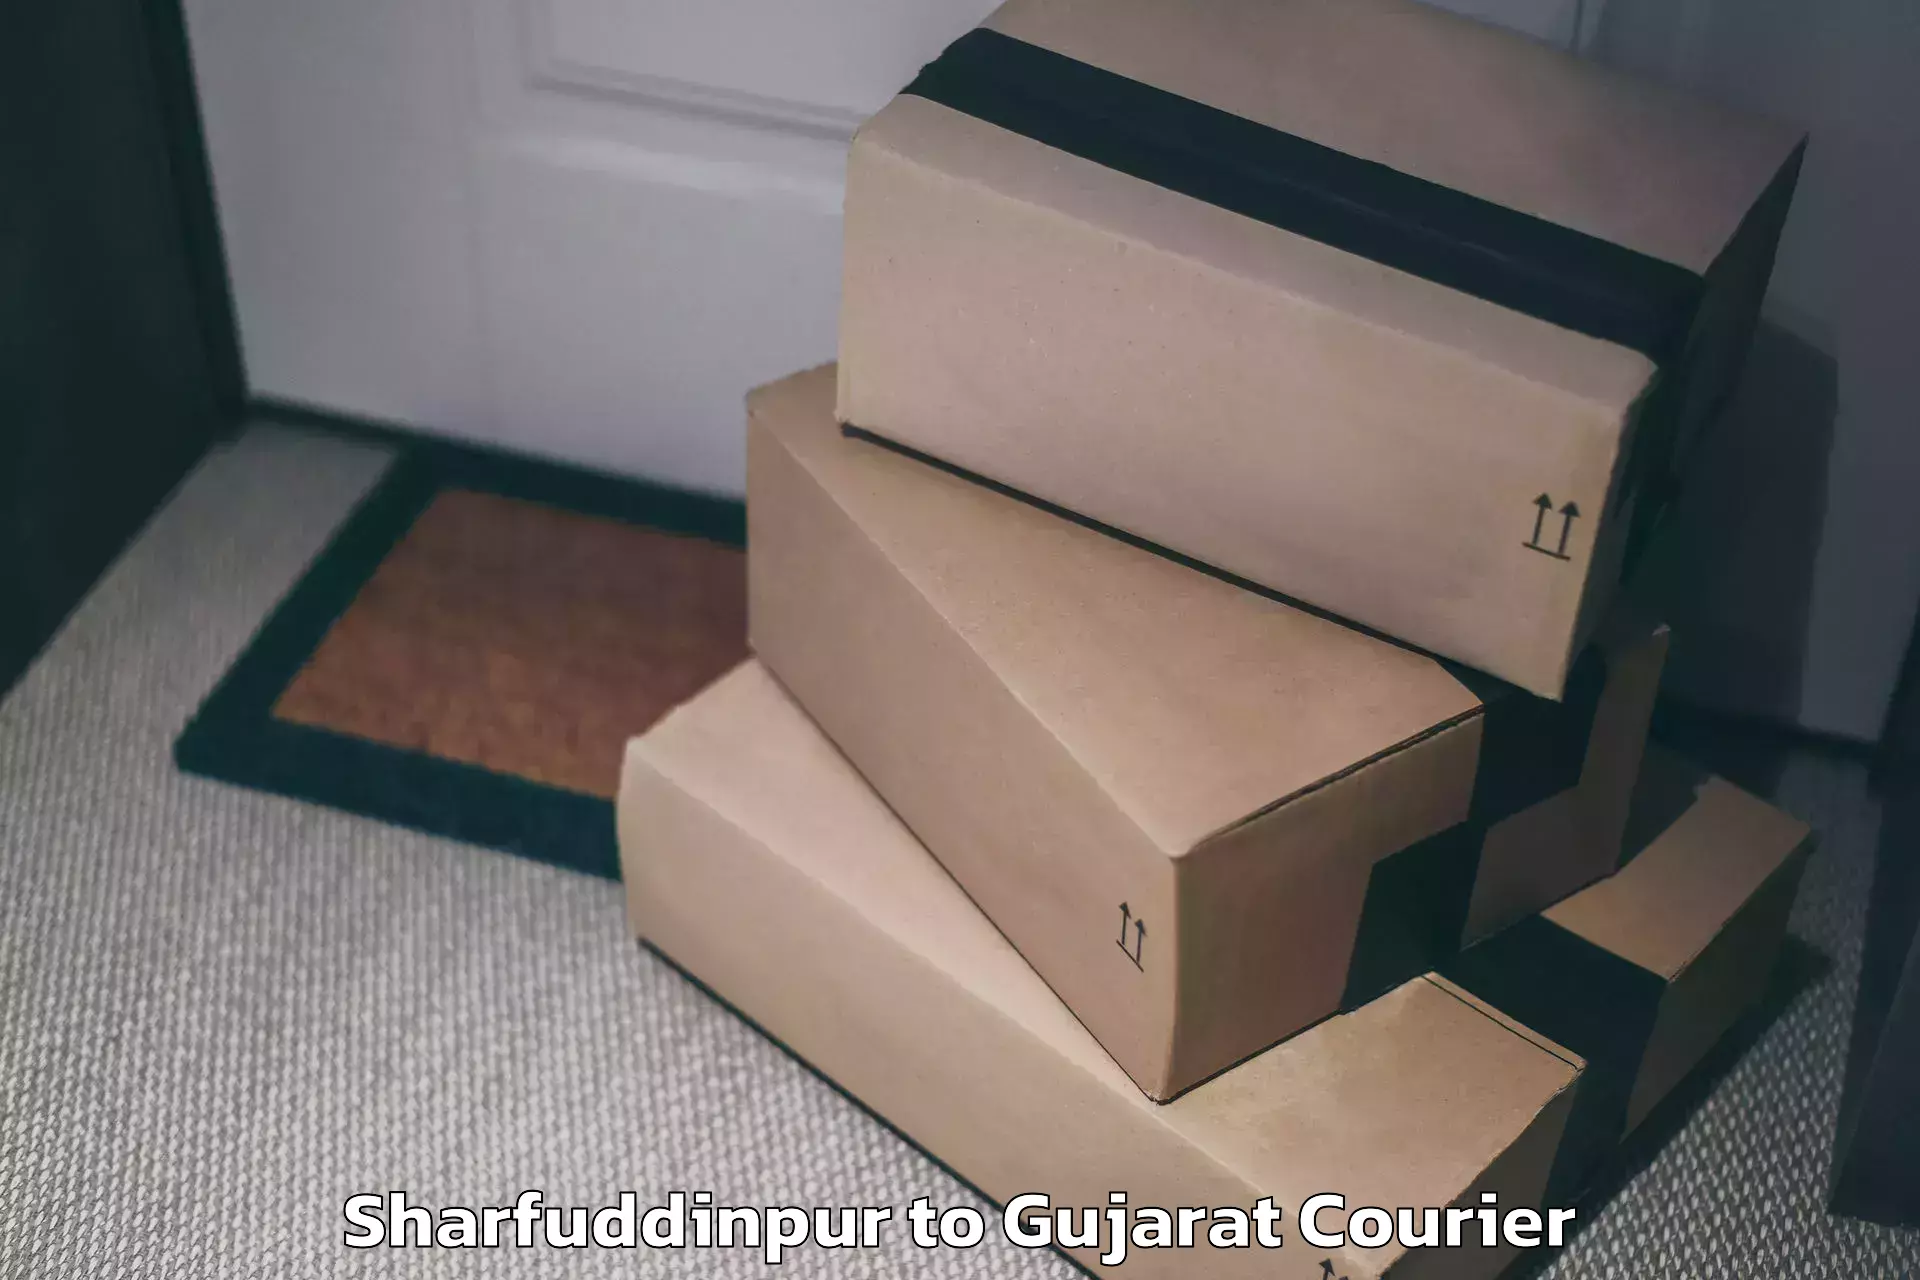 Luggage delivery system Sharfuddinpur to Vijapur